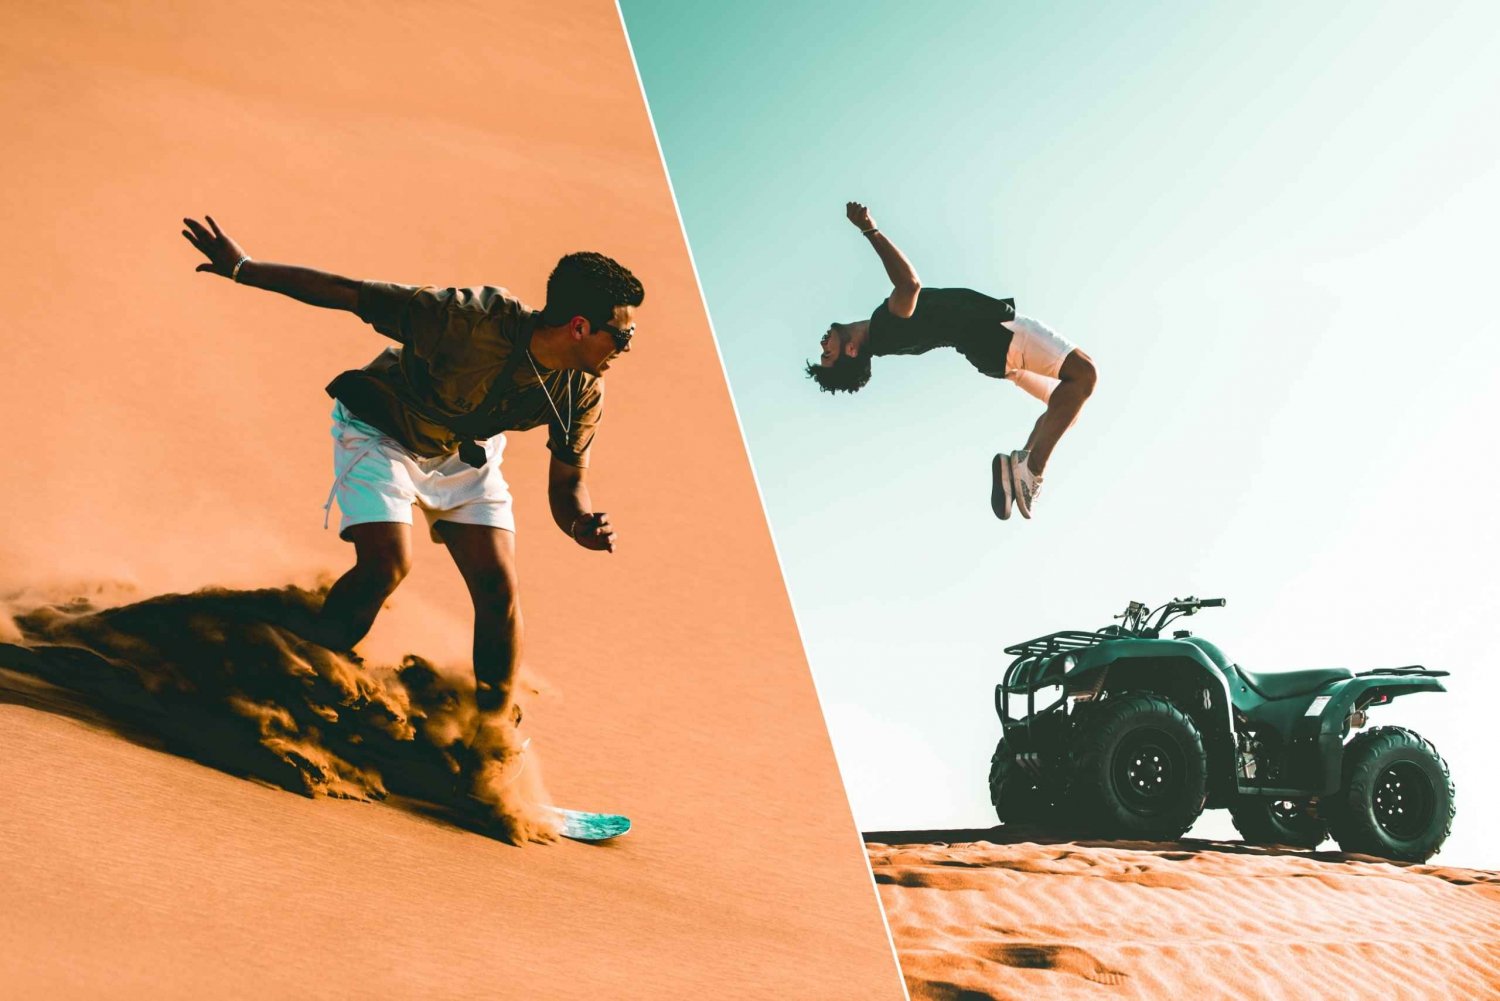 Dubai: Red Dunes Quad Bike with Sandboarding, Camels and BBQ